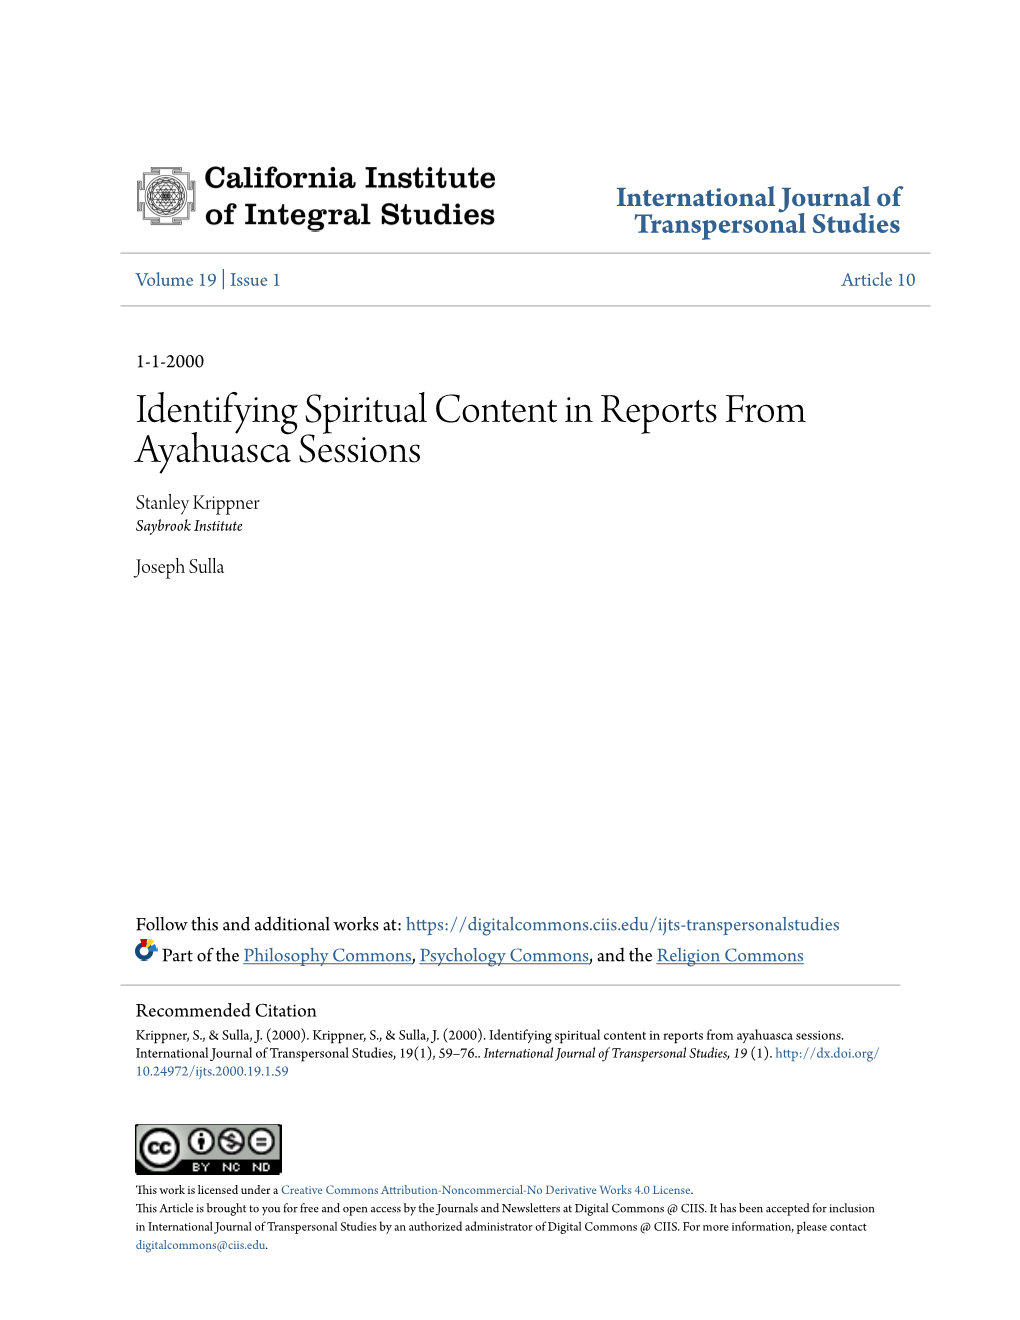 Identifying Spiritual Content in Reports from Ayahuasca Sessions Stanley Krippner Saybrook Institute